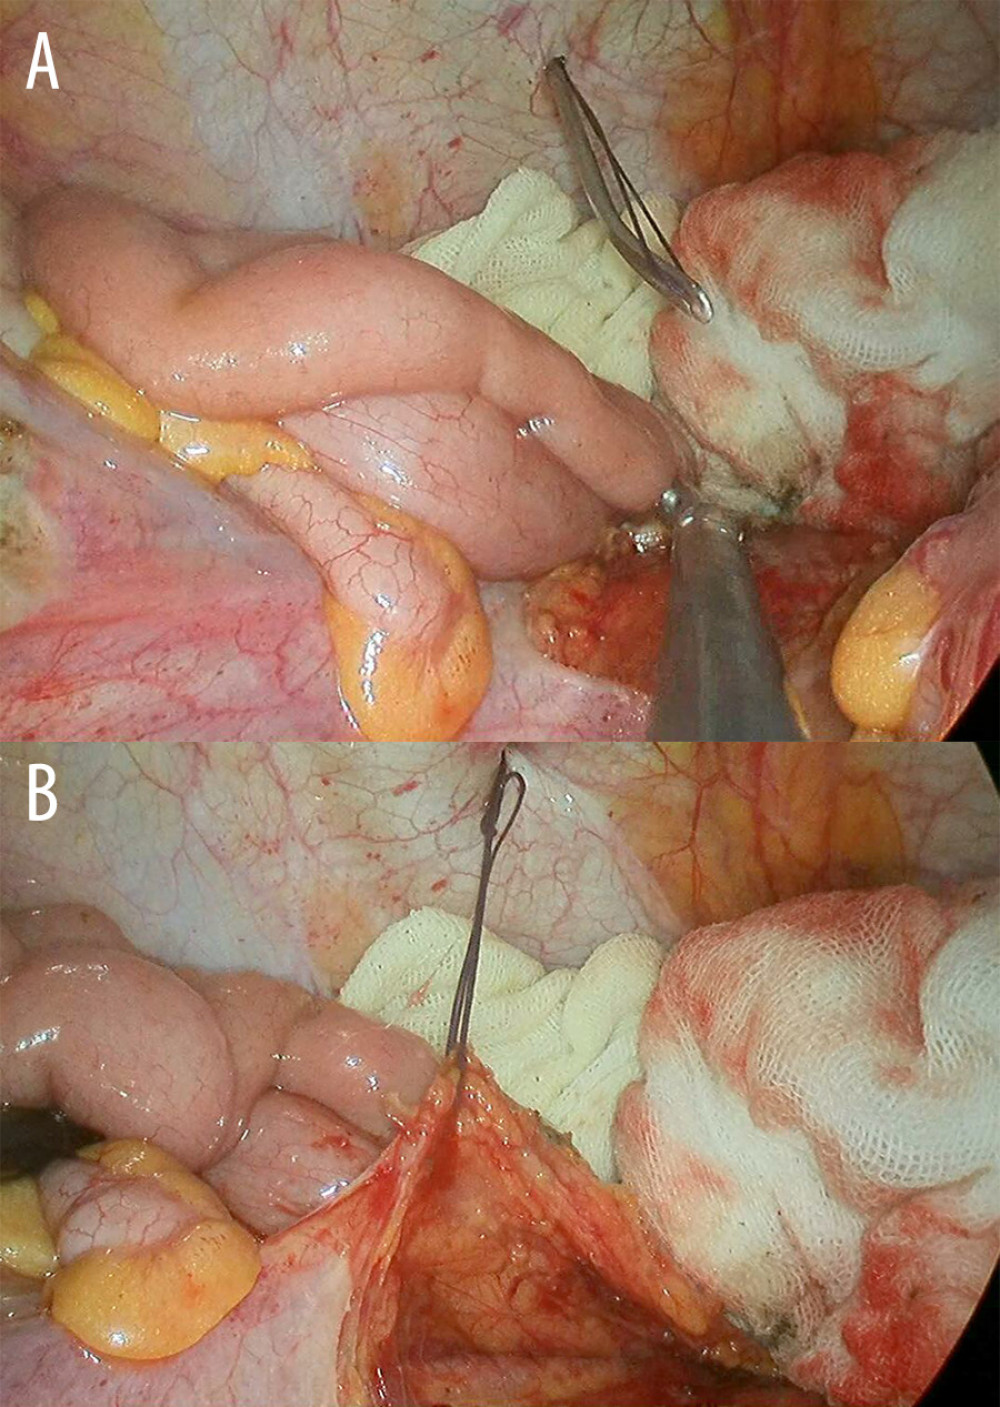 The retroperitoneum suspension needle setting. (A) The needle was passed through the abdominal wall and then to the retroperitoneum. (B) The exposed surgical field after retroperitoneum suspension.